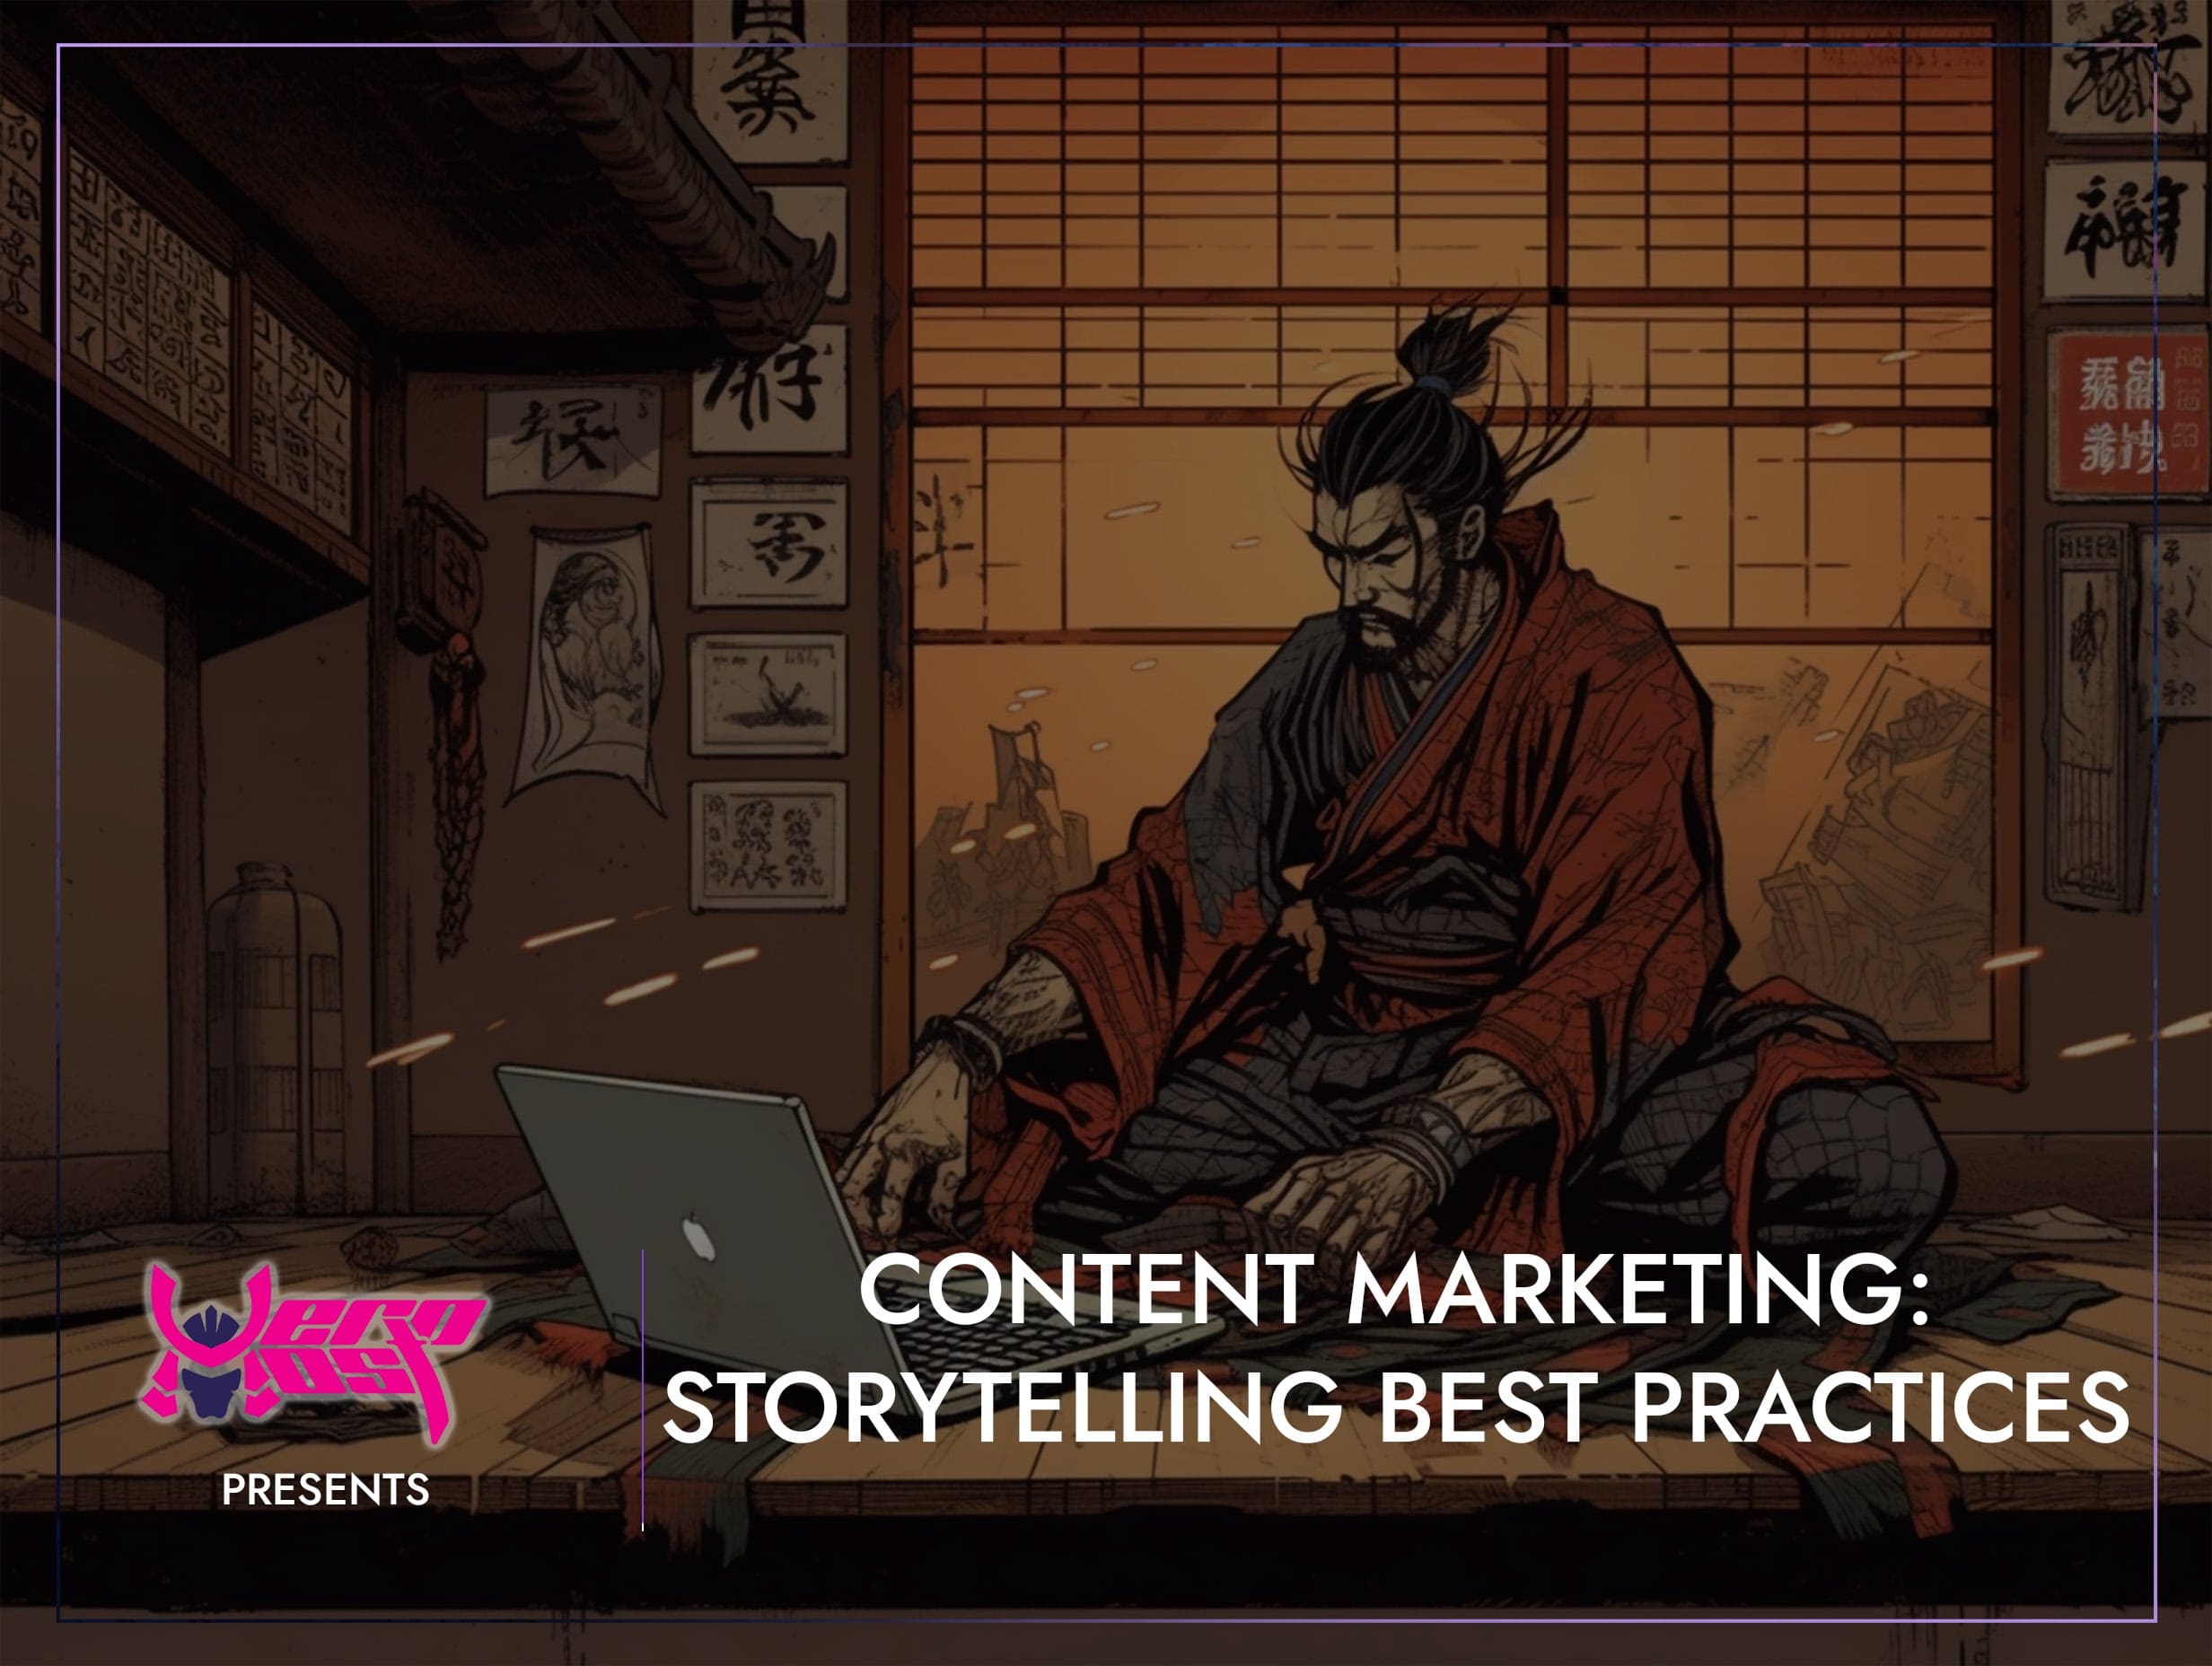 Storytelling Best Practices